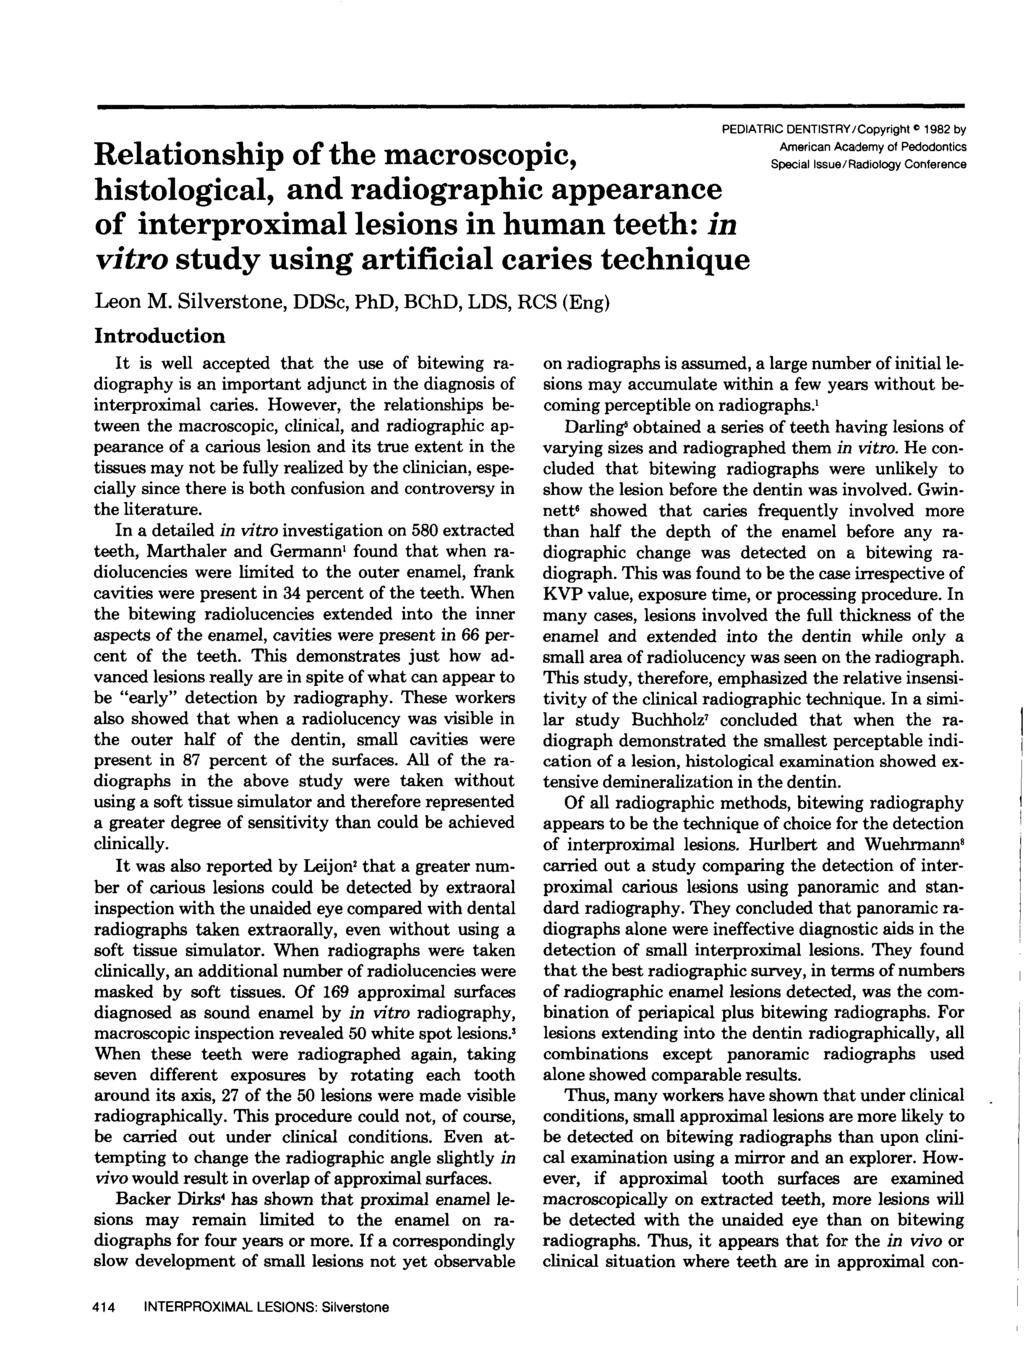 Relationship of the macroscopic, histological, and radiographic appearance of interproximal lesions in human teeth: in vitro study using artificial caries technique PEDIATRIC DENTISTRY/Copyright 1982